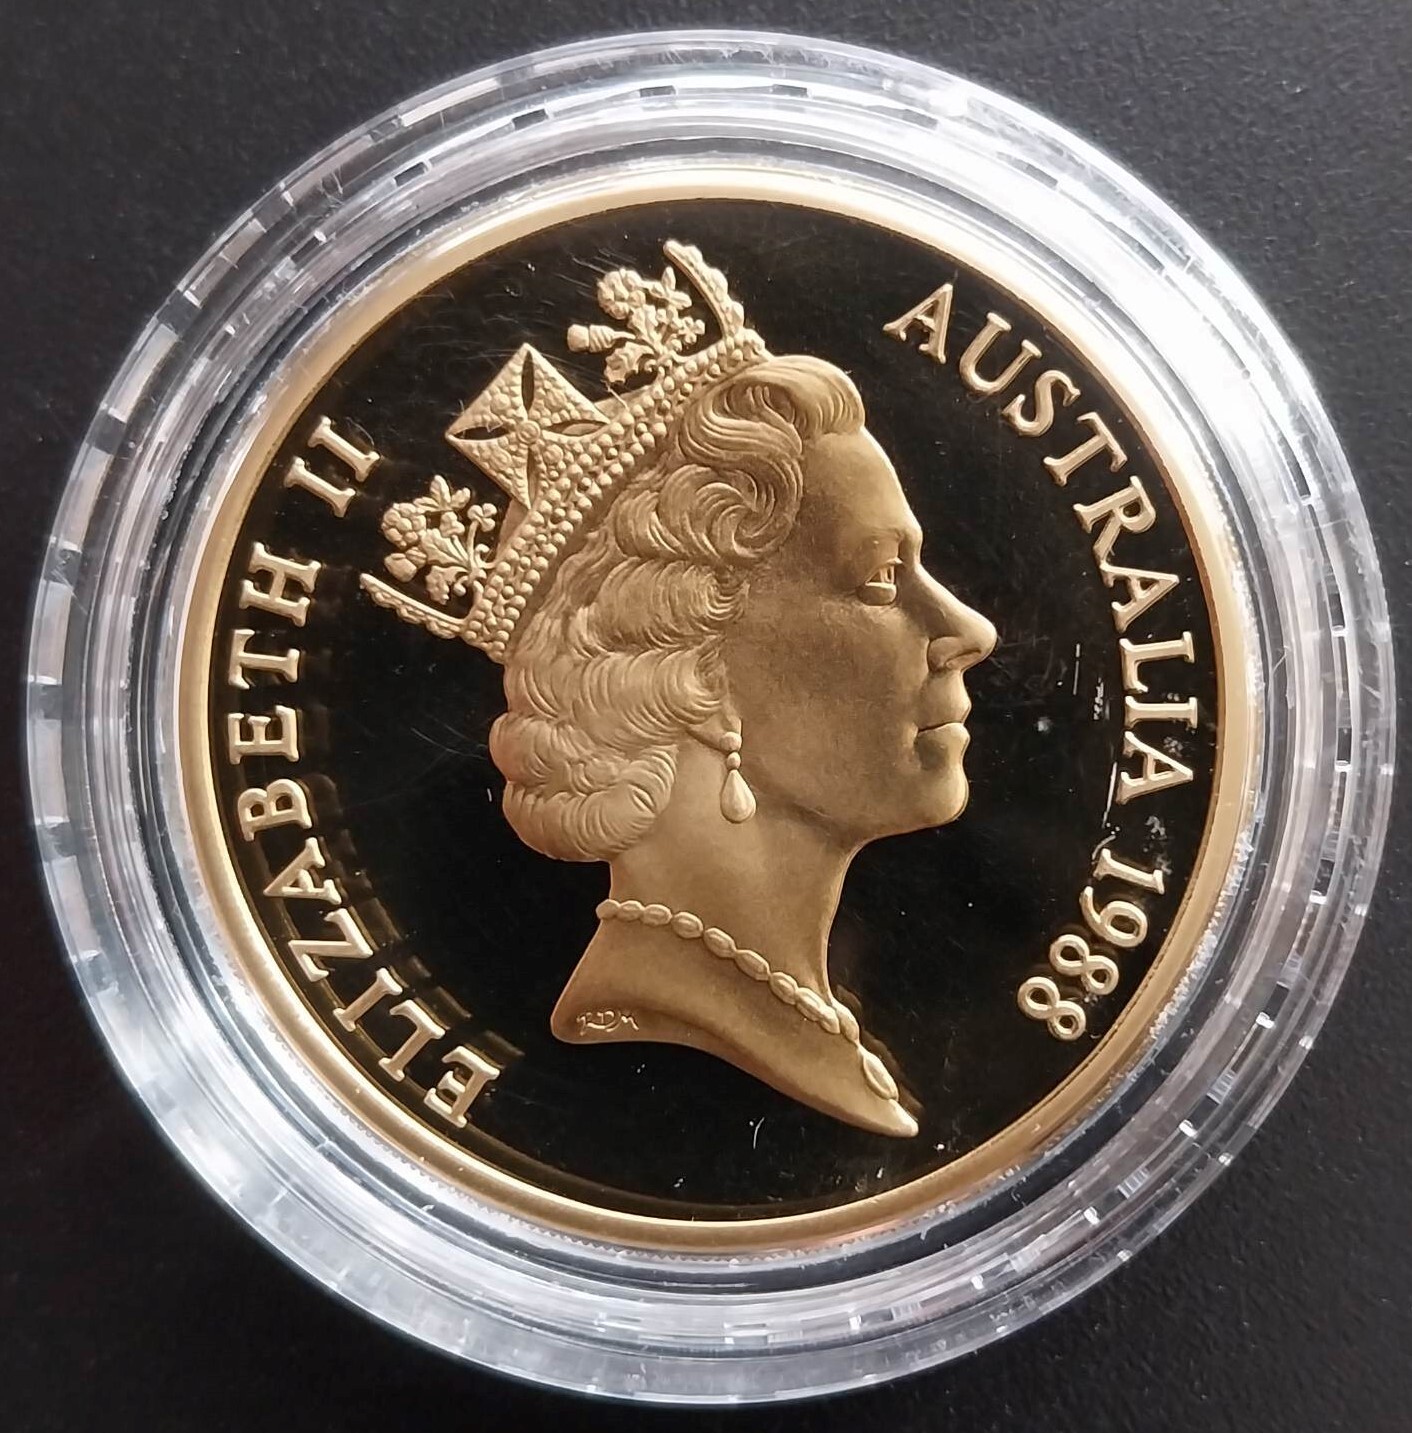 1988 $5 Parliament House Canberra Commemorative Proof Strike Coin In Capsule